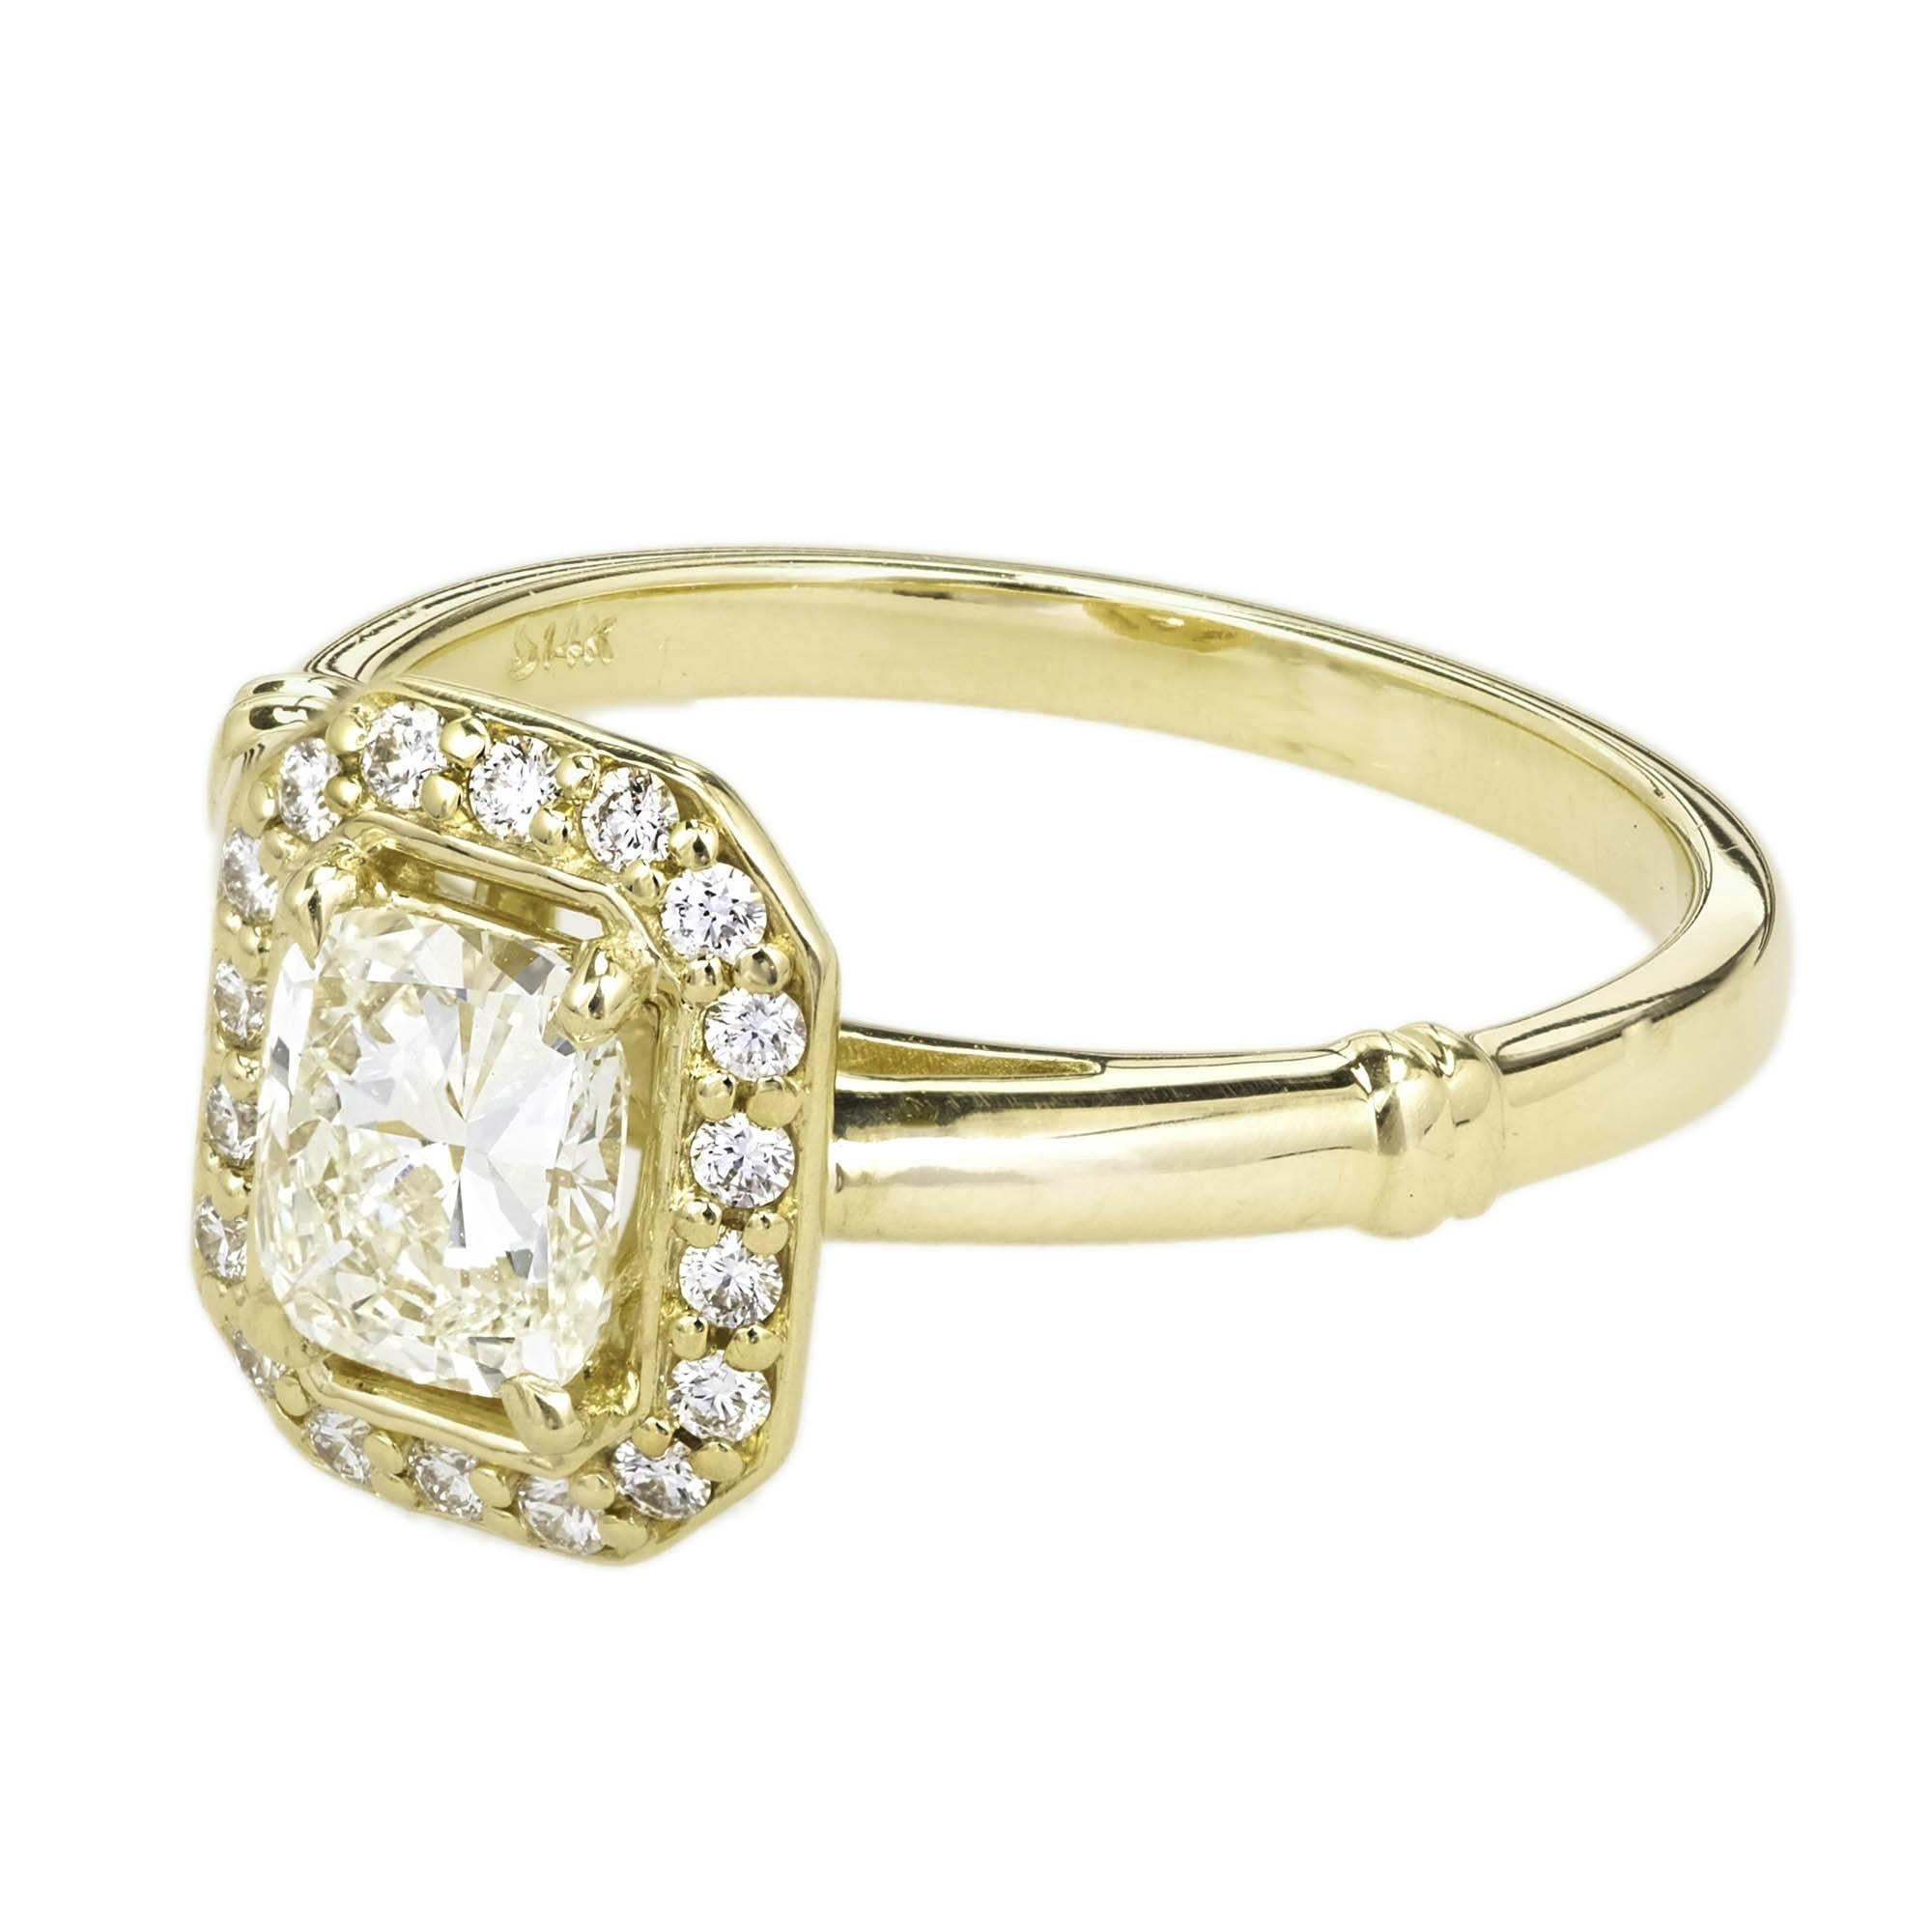 Peter Suchy elongated cushion cut Diamond engagement ring. The 14k yellow gold setting was chosen to show off the sparkle and beauty of the stone. Octagonal (8 sided) top with a delicate full cut Diamond halo rim. 

1 elongated cushion modified